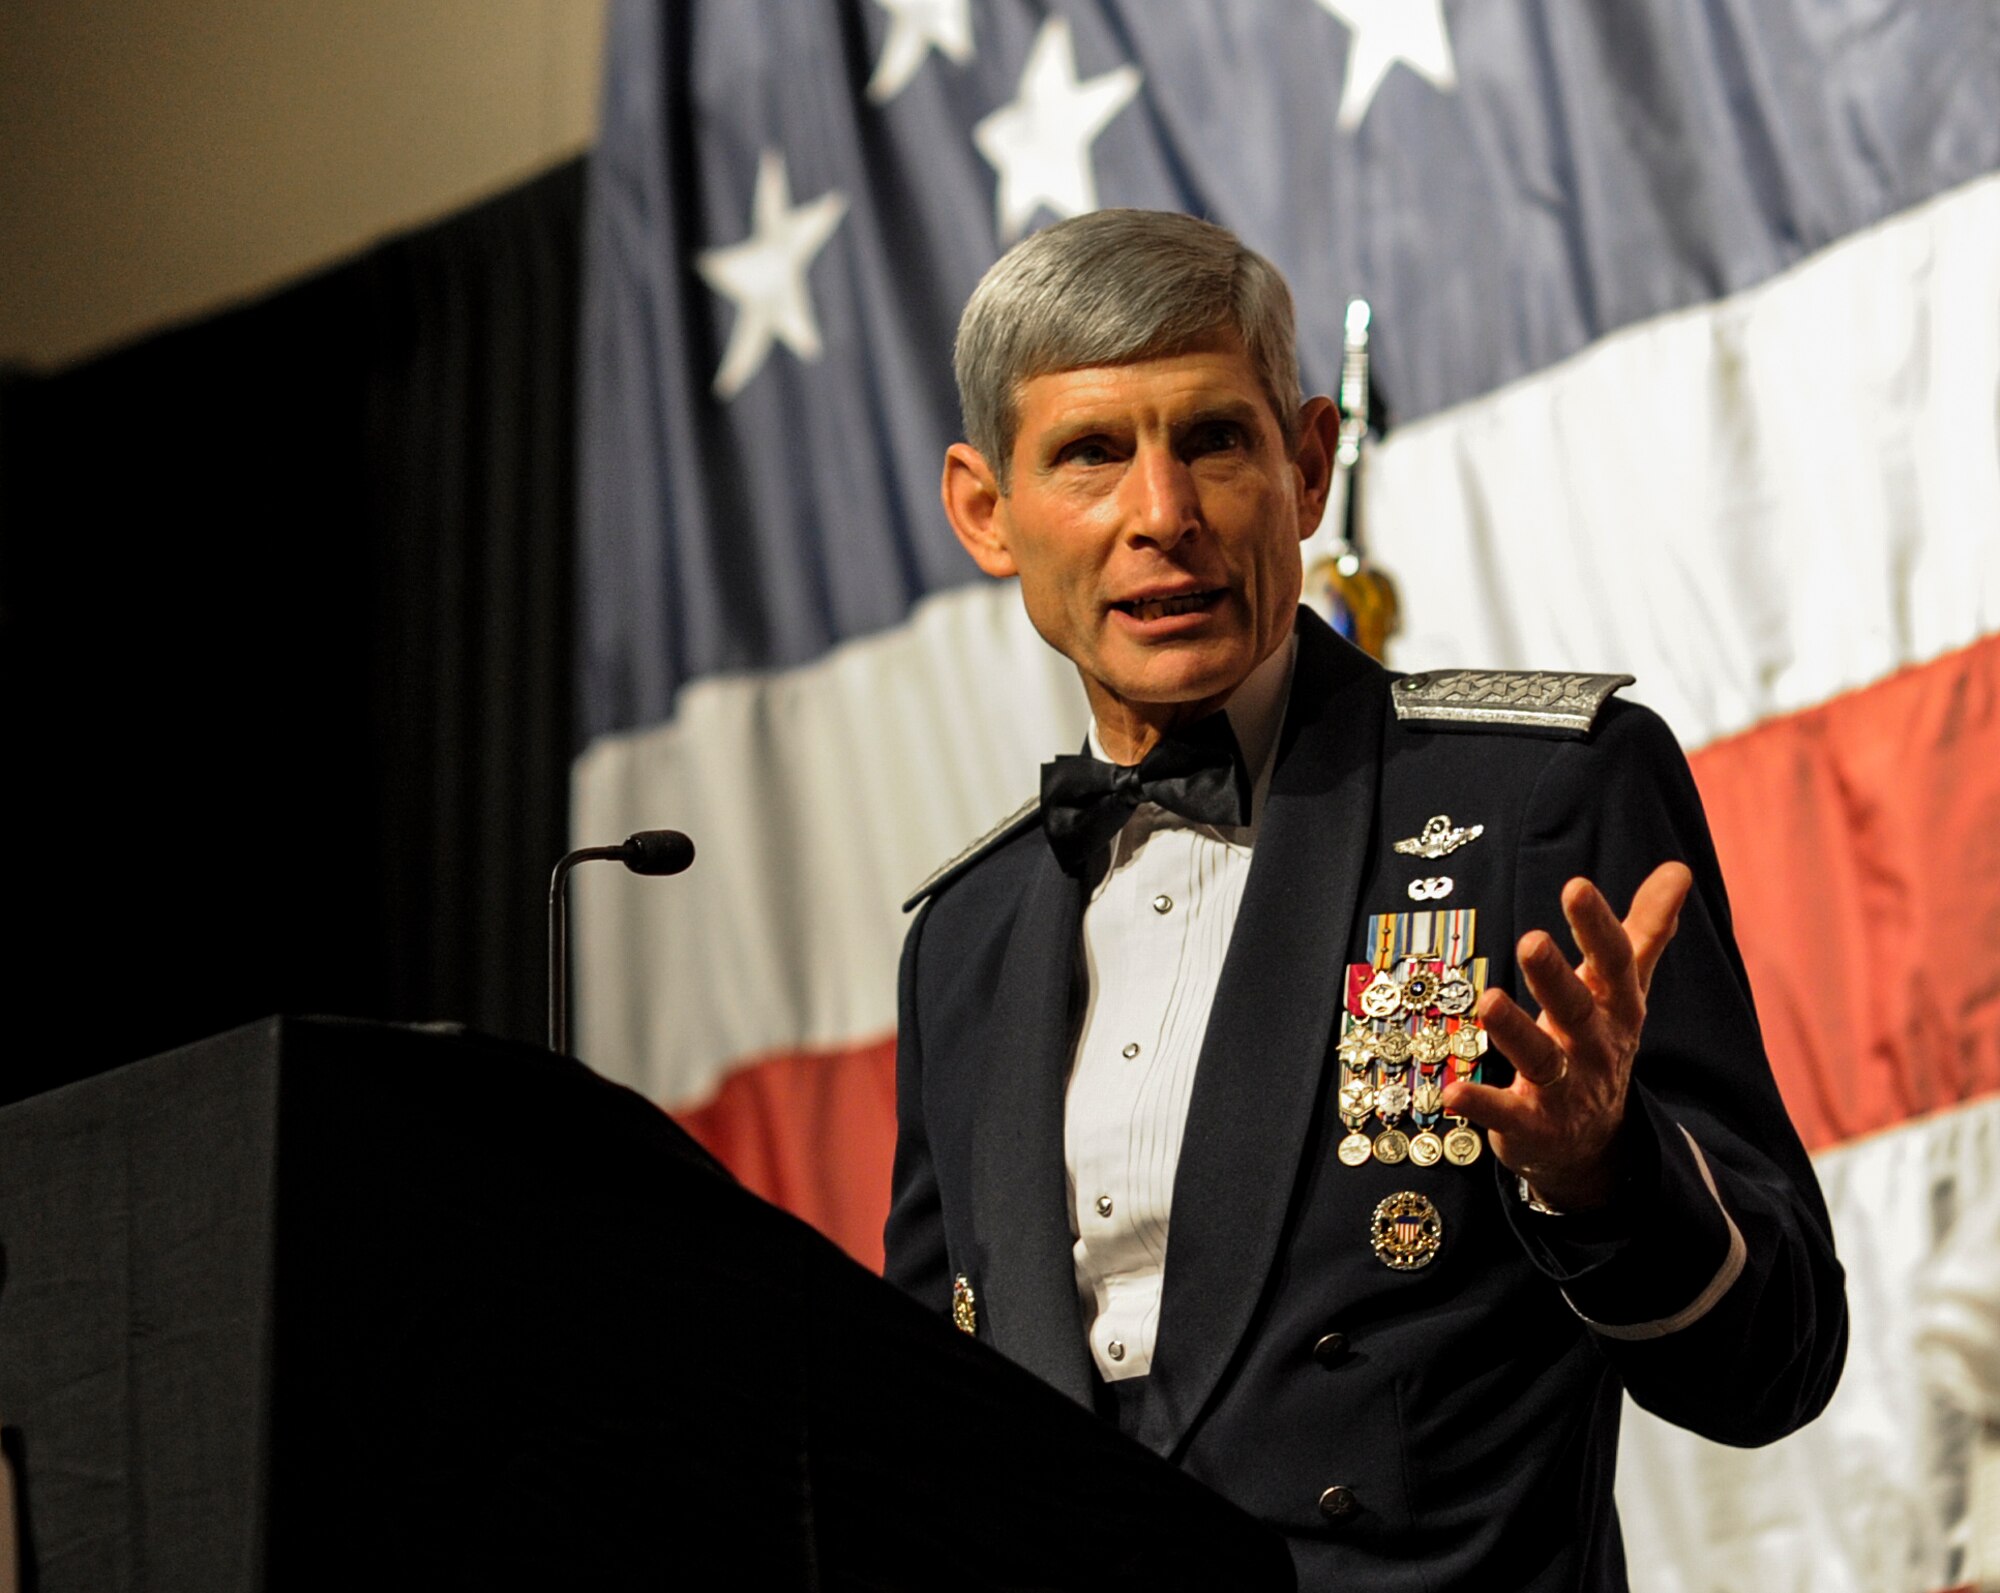 U.S. Air Force Gen. (Ret.) Norton Schwartz speaks during his Order of the Sword ceremony at the Emerald Coast Convention Center on Okaloosa Island, Fla., Feb.1, 2013. The original Order of the Sword was patterned after two orders of chivalry founded during the Middle Ages in Europe: the British Royal Order of the Sword and the Swedish Military Order of the Sword, which are still in existence today. (U.S. Air Force photo/Airman 1st Class Christopher Callaway)
